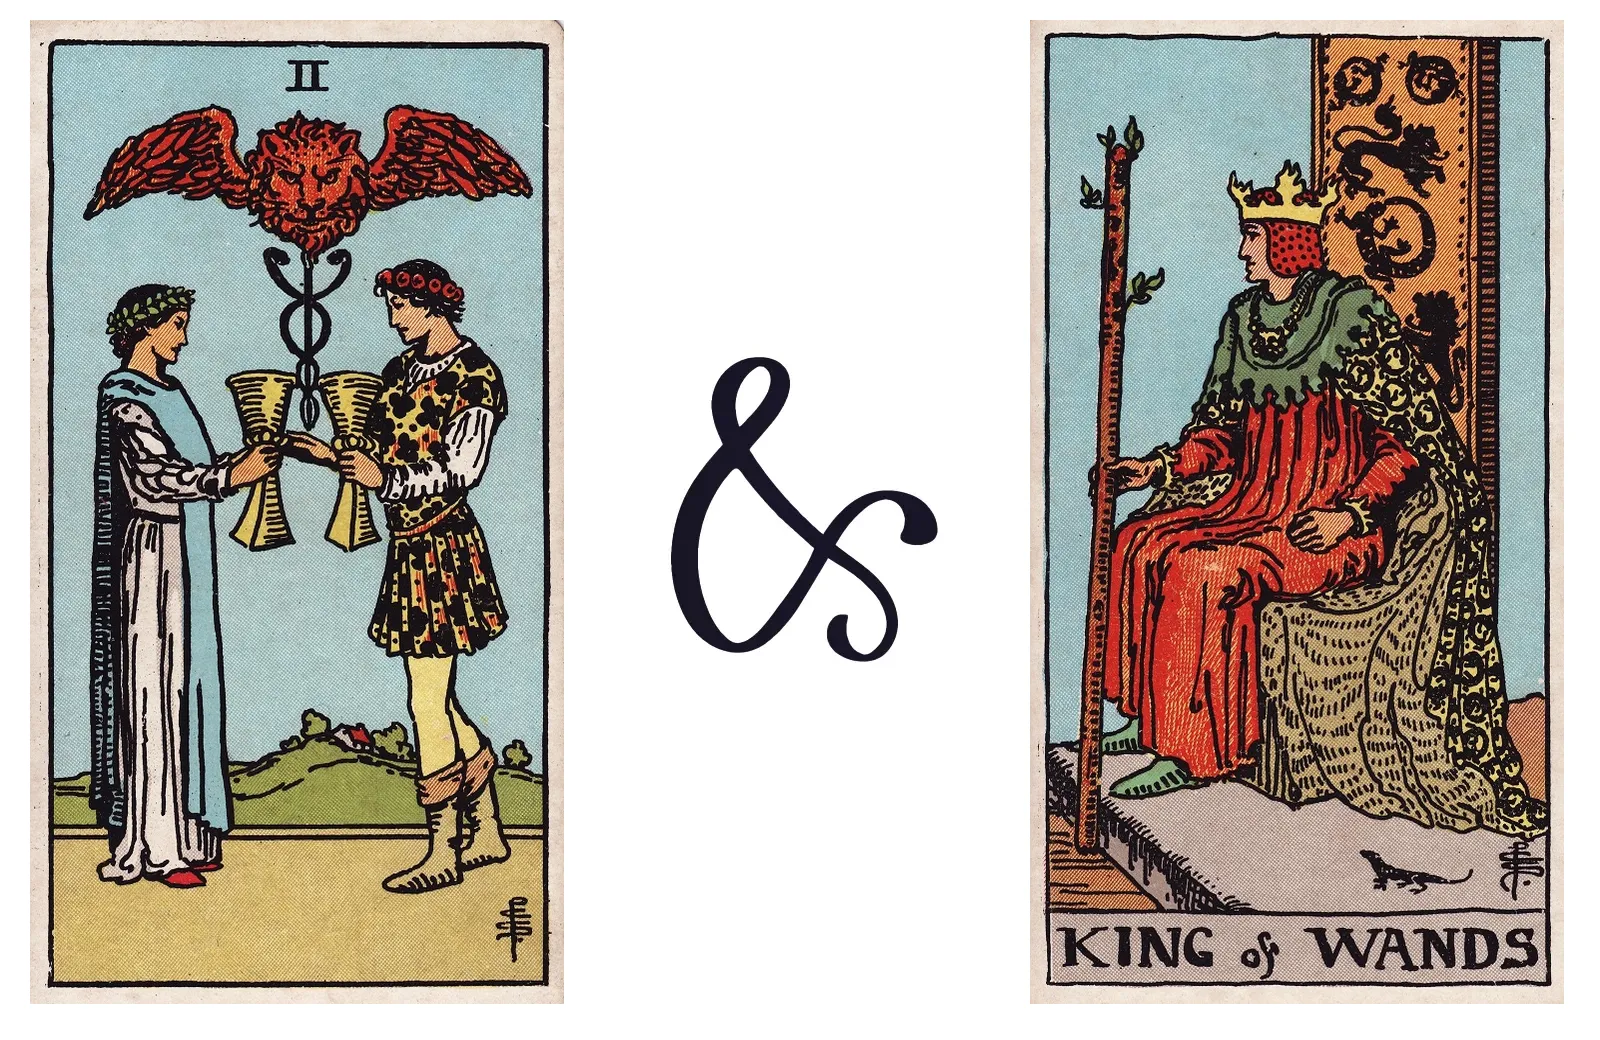 Two of Cups and King of Wands